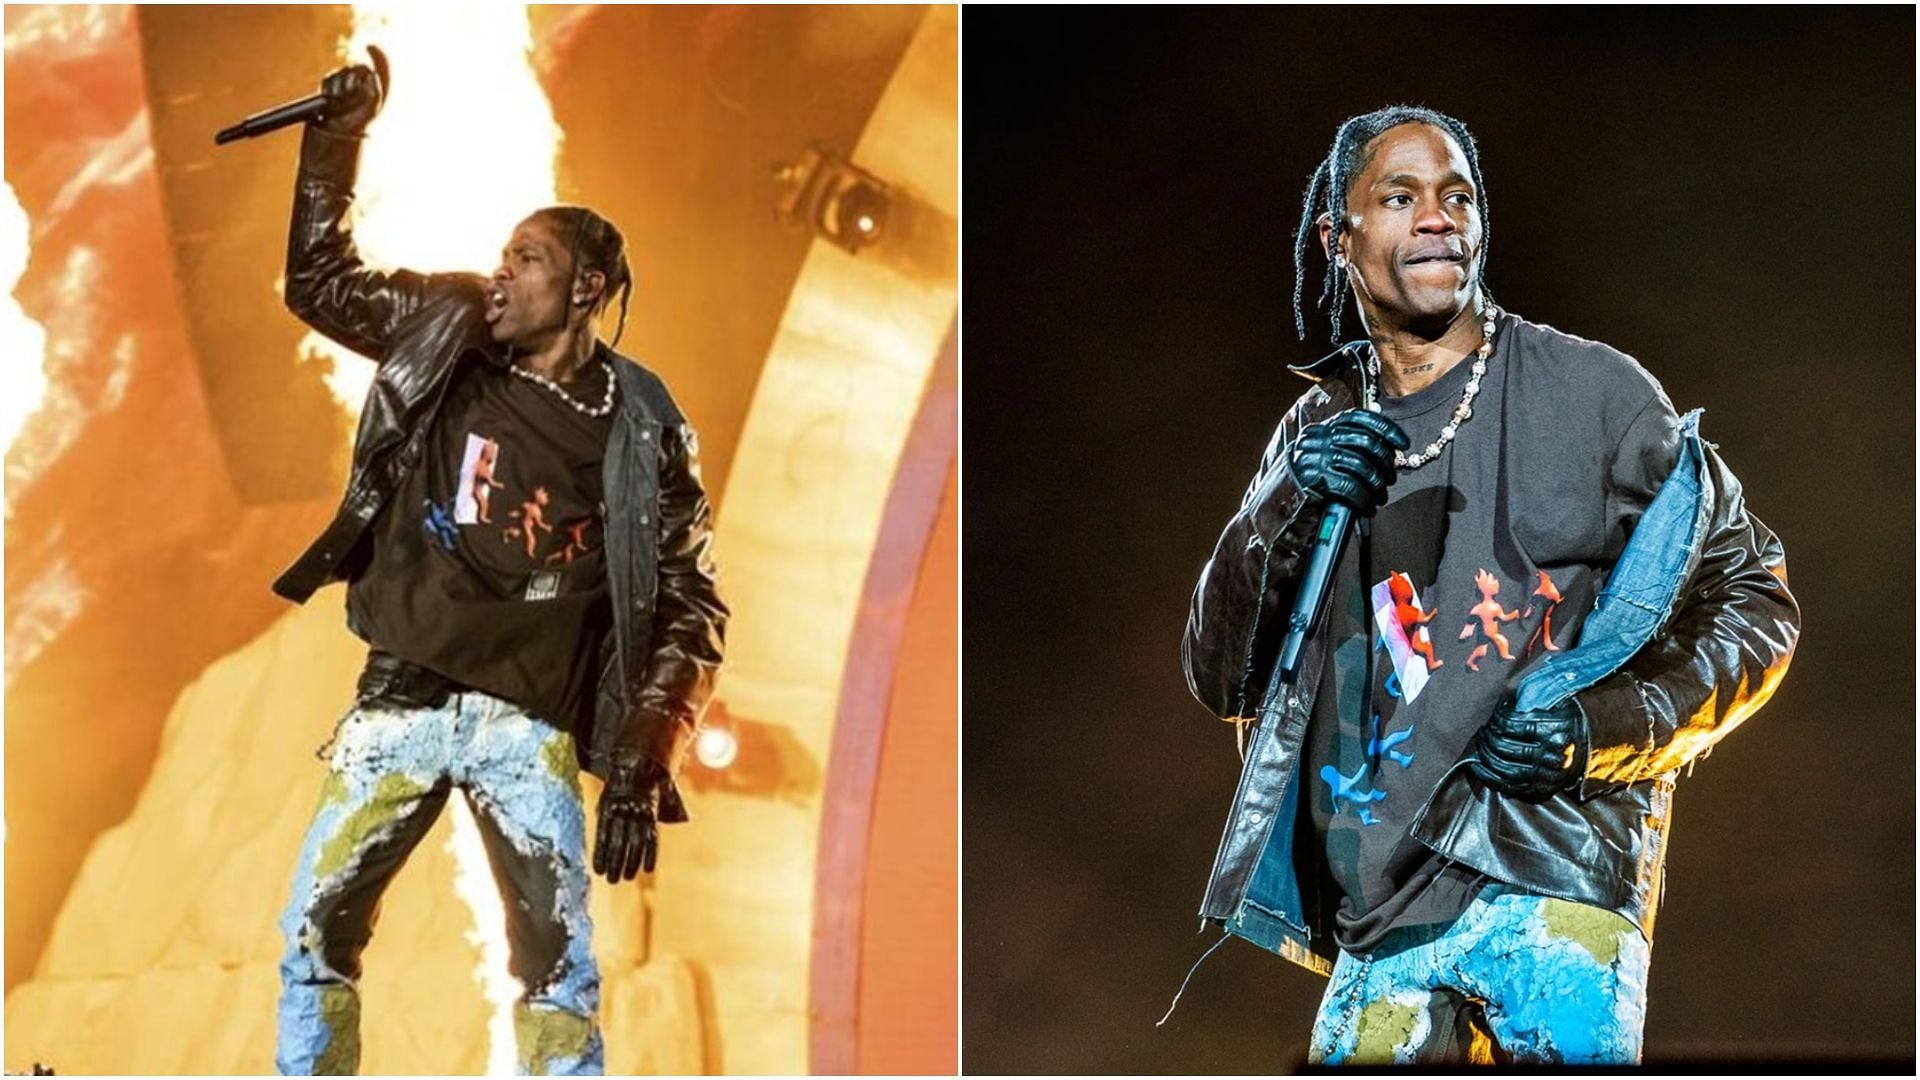 Travis Scott has been sued for wrongful death by a woman who suffered miscarriage. (Images via AP)